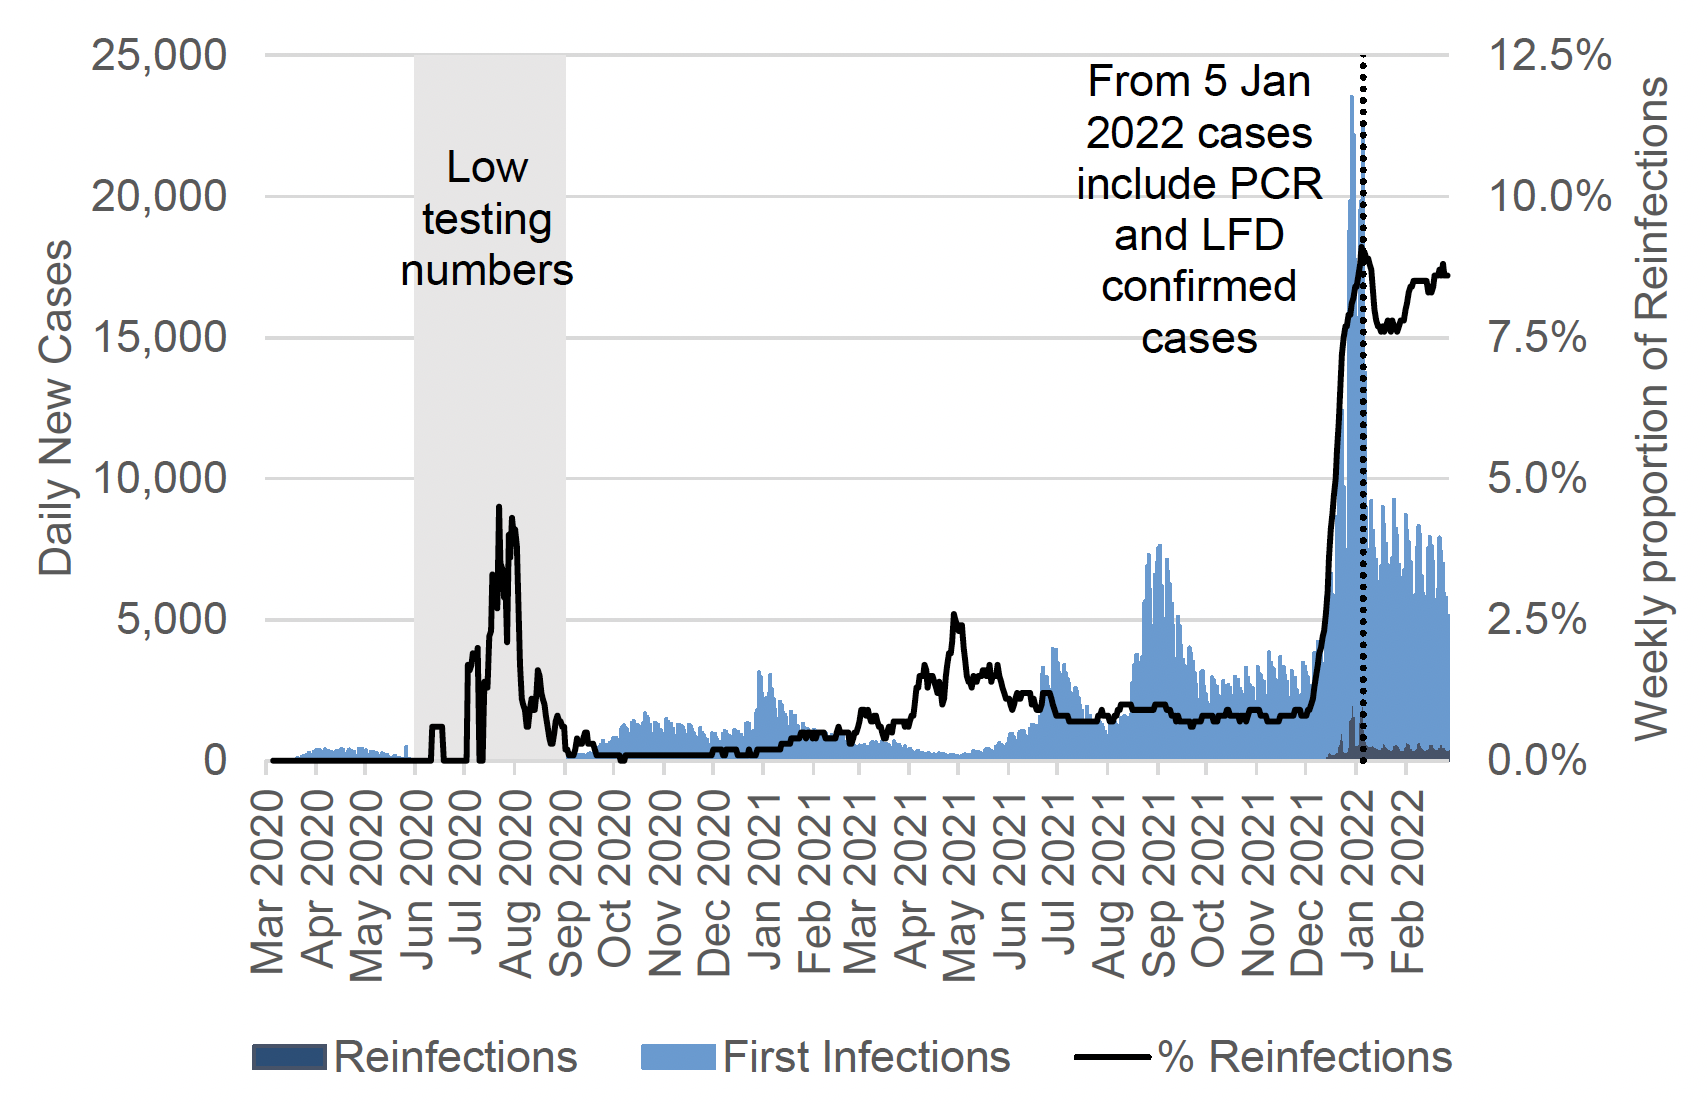 a bar chart showing daily PCR and LFD case numbers by episode of infection (first infection or reinfection) by specimen date from March 2020 to February 2022 with a line showing the seven-day average proportion of daily cases that are reinfections. The number of daily reinfection cases is not visible until late 2022. The seven-day average proportion of reinfections peaked in July 2020, April 2021 and early January 2022. The chart has a note that says: “from 5 January 2022 cases include PCR and LFD confirmed cases”. Before 5 January 2022, the case rate includes only PCR confirmed cases.